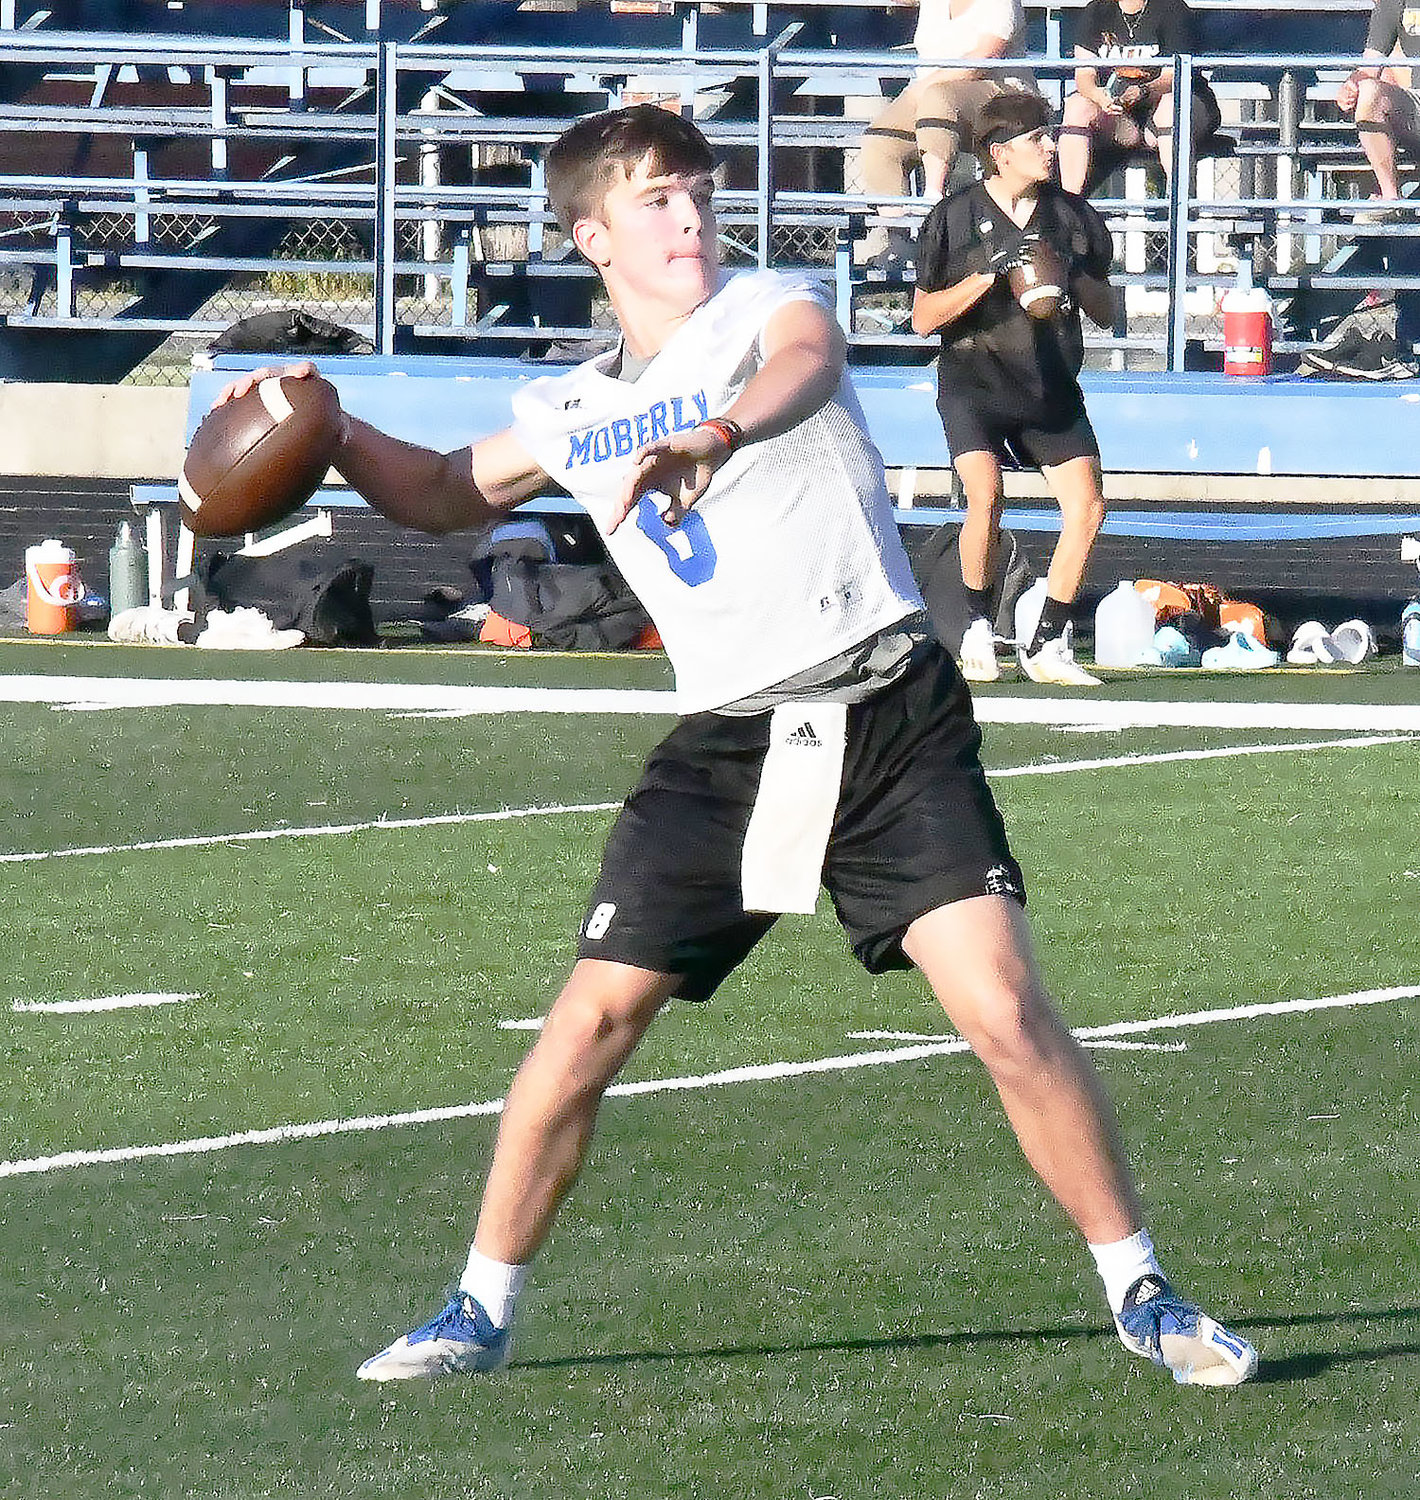 Collin Huffman is expected to be Moberly's starting quarterback for the 2022 season.